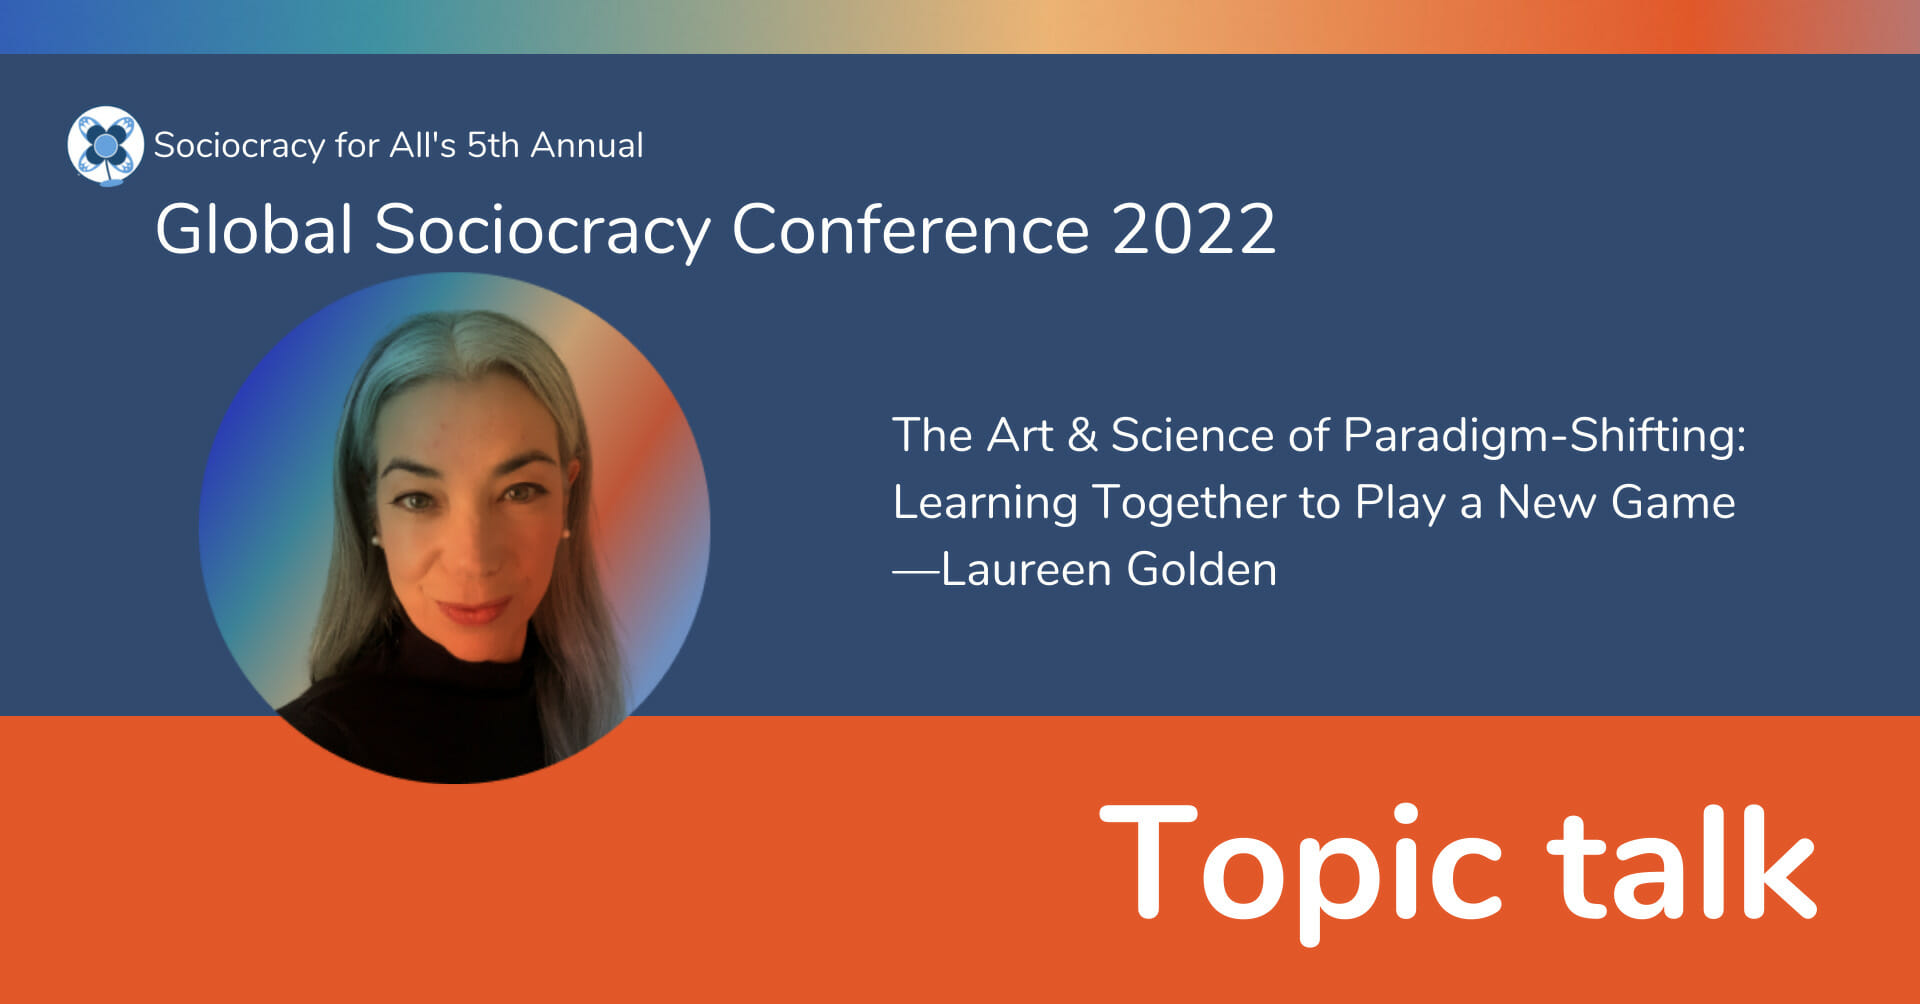 The Art & Science of Paradigm Shifting: Learning Together to Play a New Game —Laureen Golden